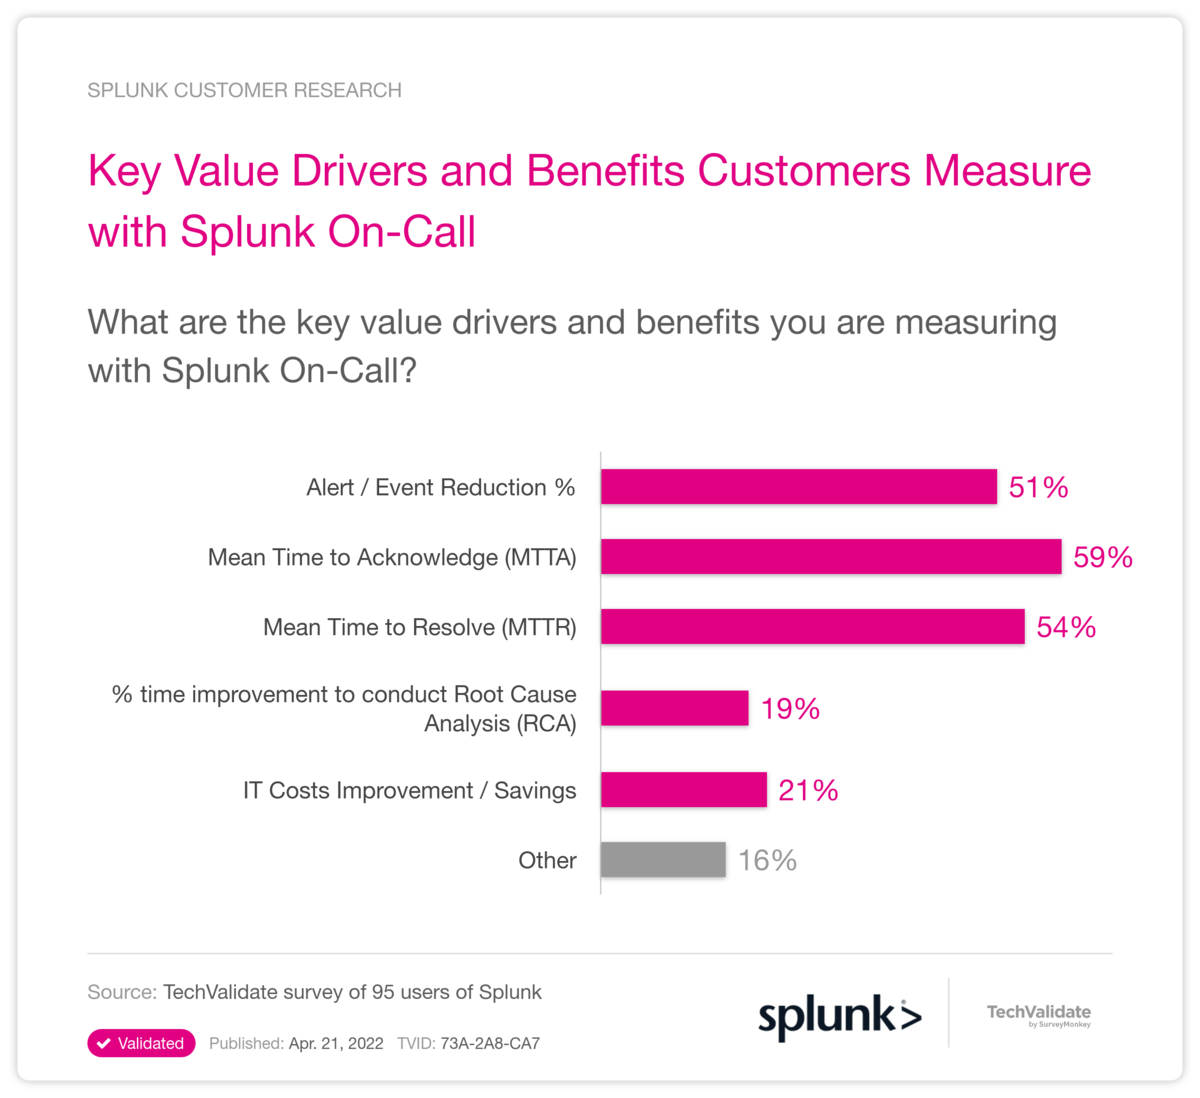 Key Value Drivers and Benefits Customers Measure with Splunk On-Call